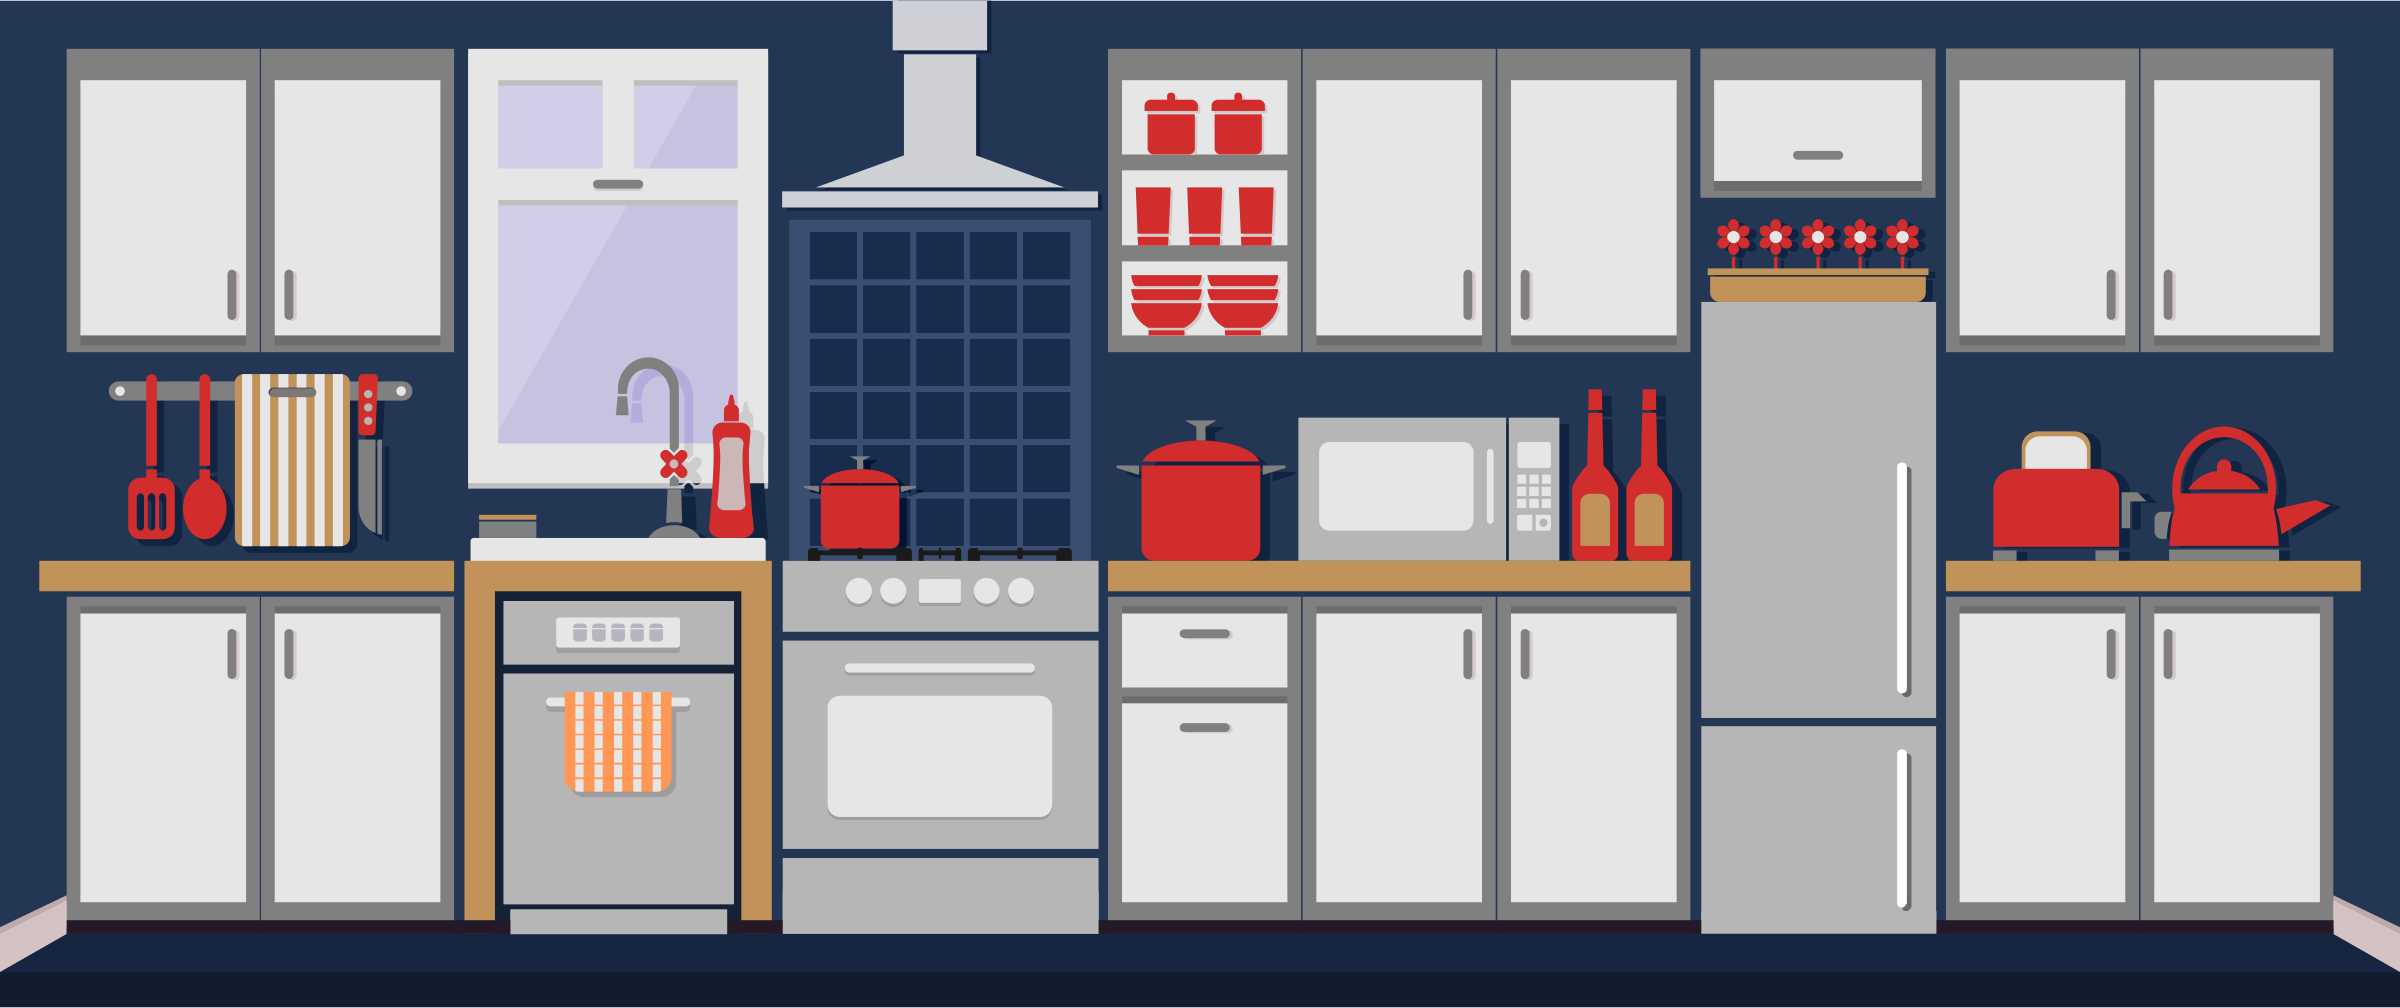 Simple Kitchen Remixed with Flat Colors and Shadows SVG Clip arts